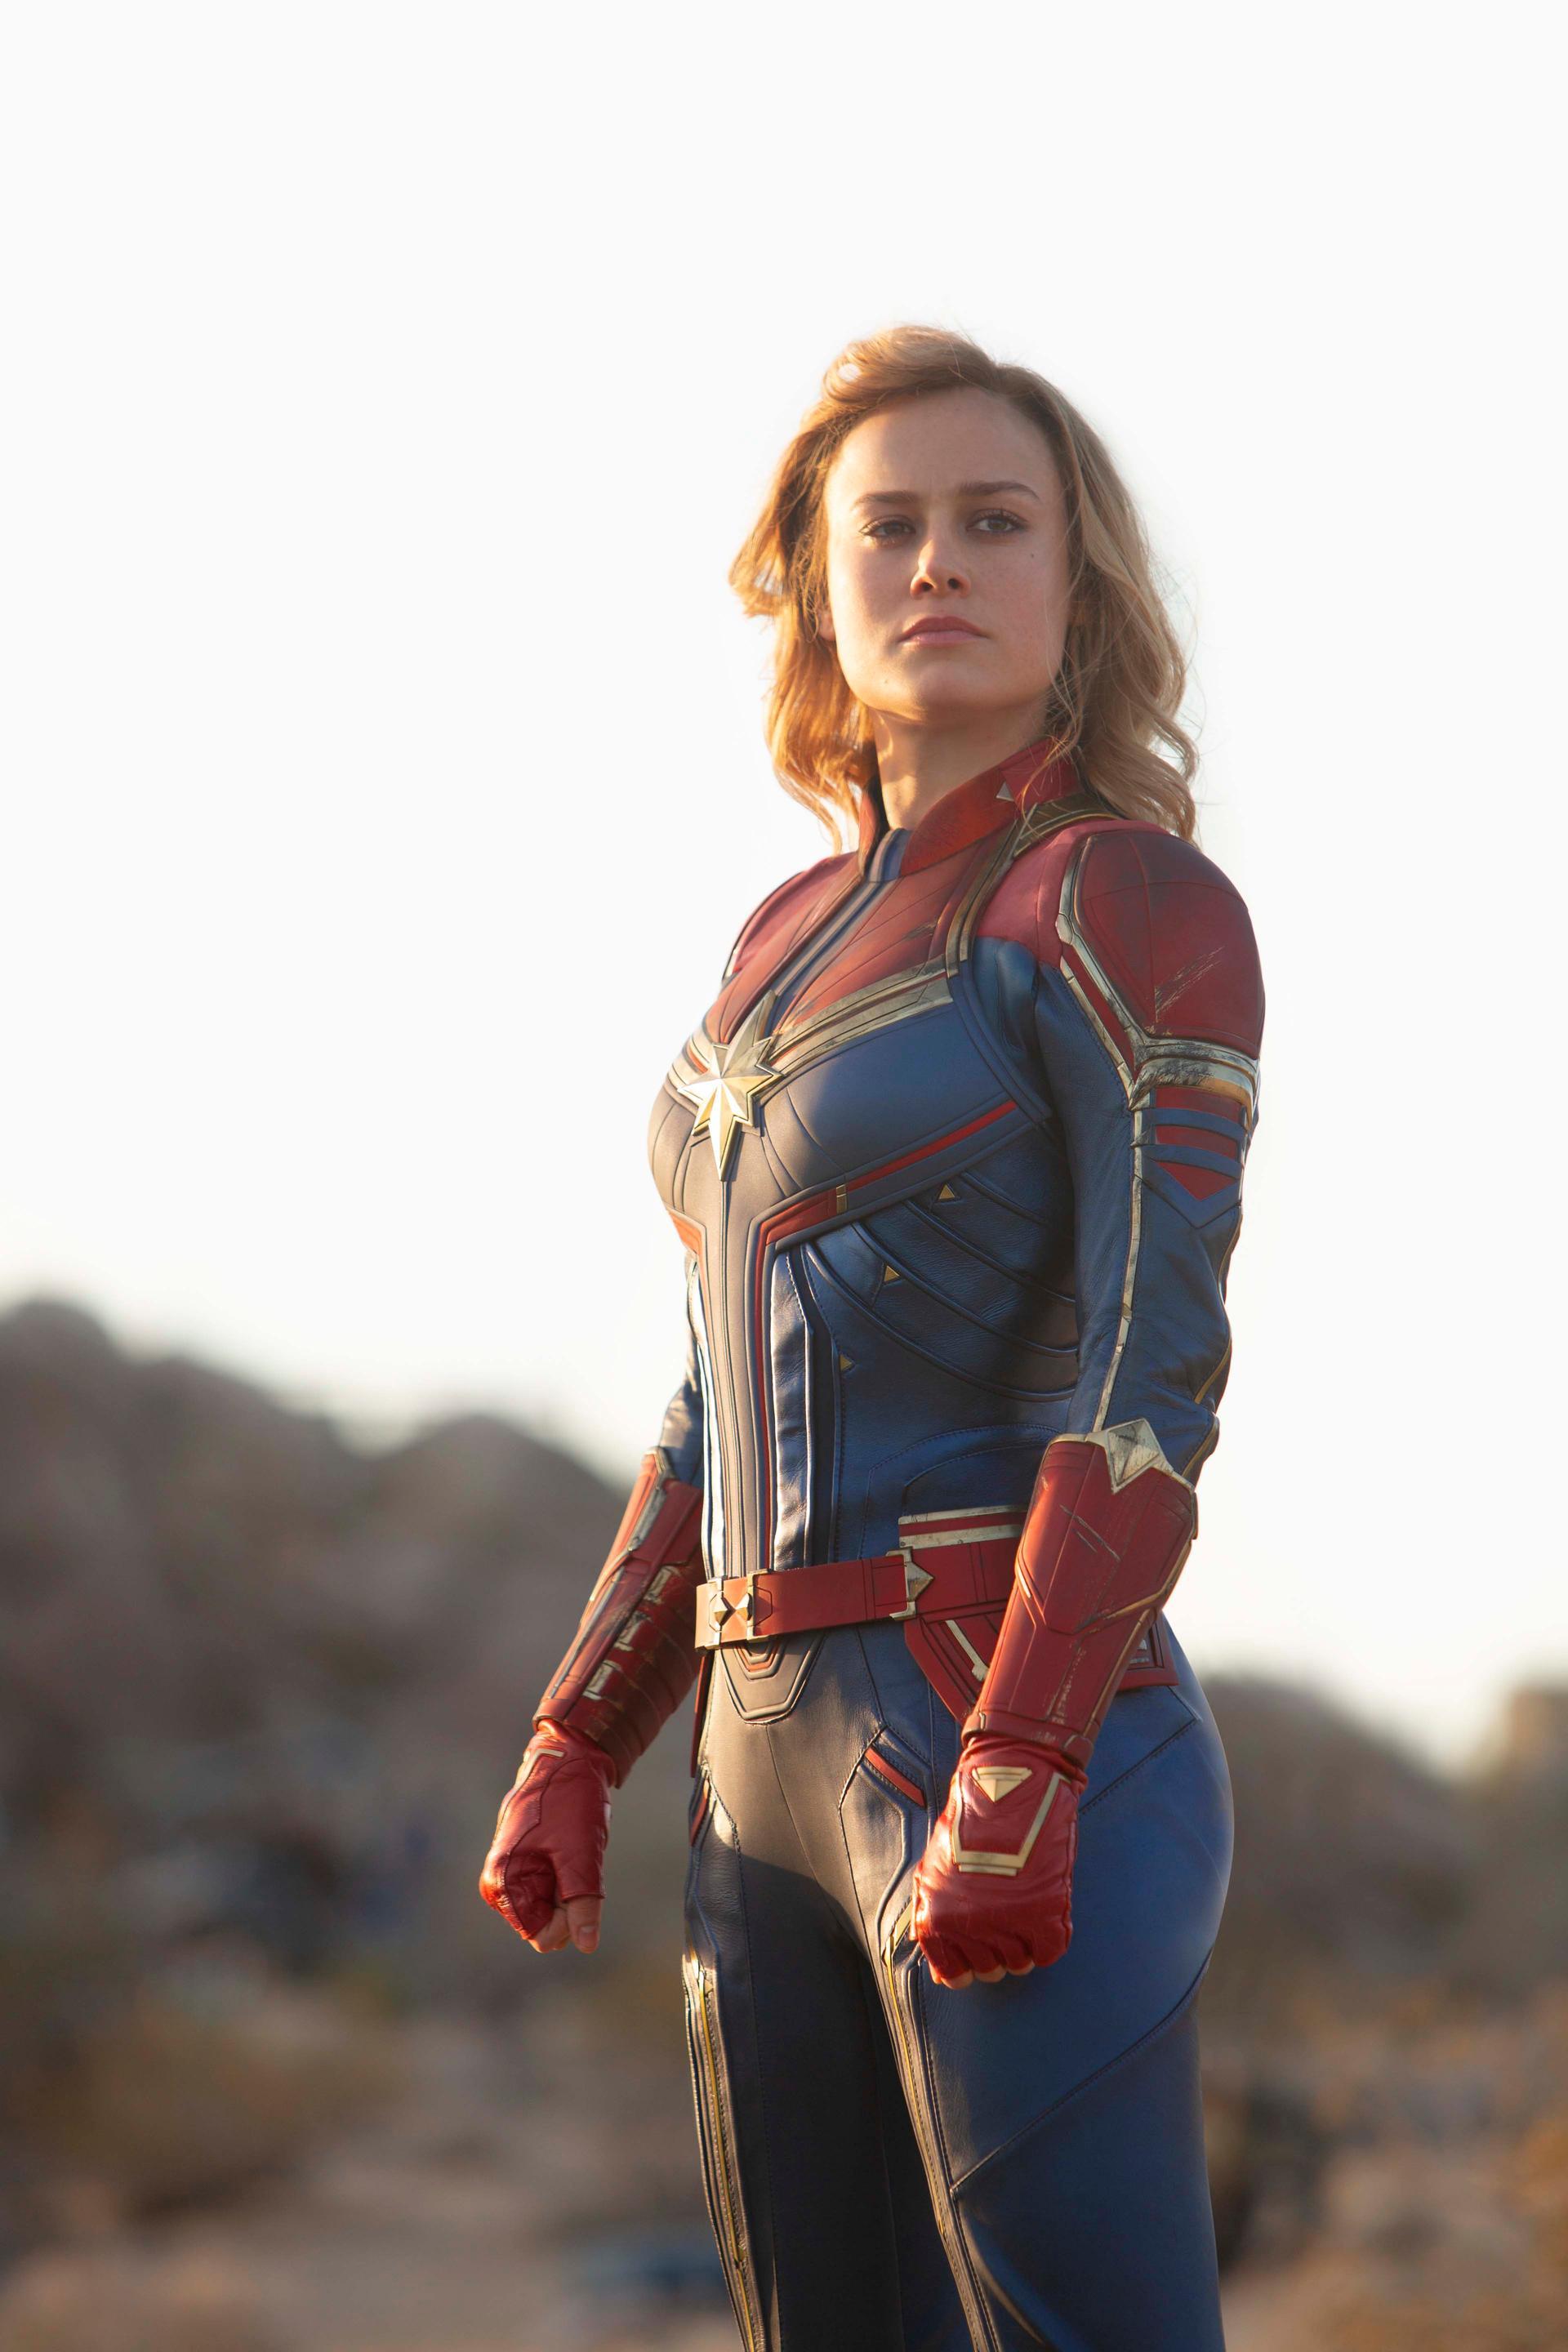 'Captain Marvel', featuring Brie Larson, was one of 2019's female-fronted films. Chuck Zlotnick / Marvel Studios